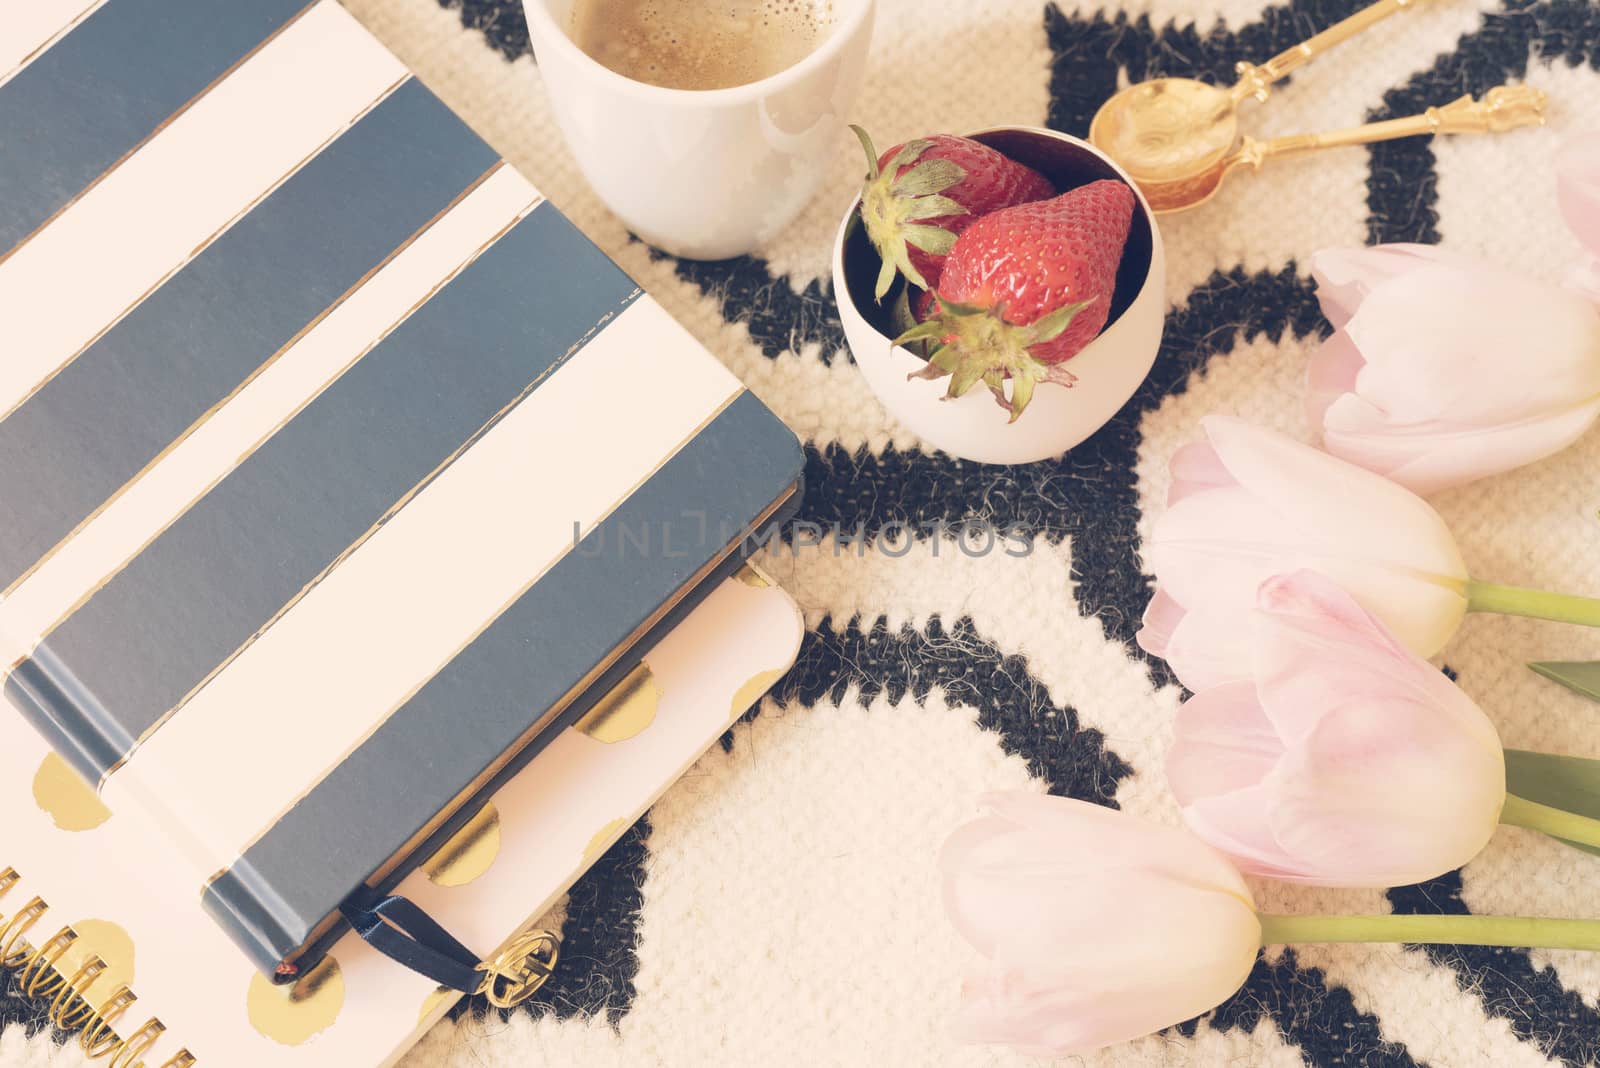 Coffee, strawberries, notebooks on Scandinavian rug. Pink Tulips and Gold Spoons. White black pattern and gold theme. Lifestyle concept